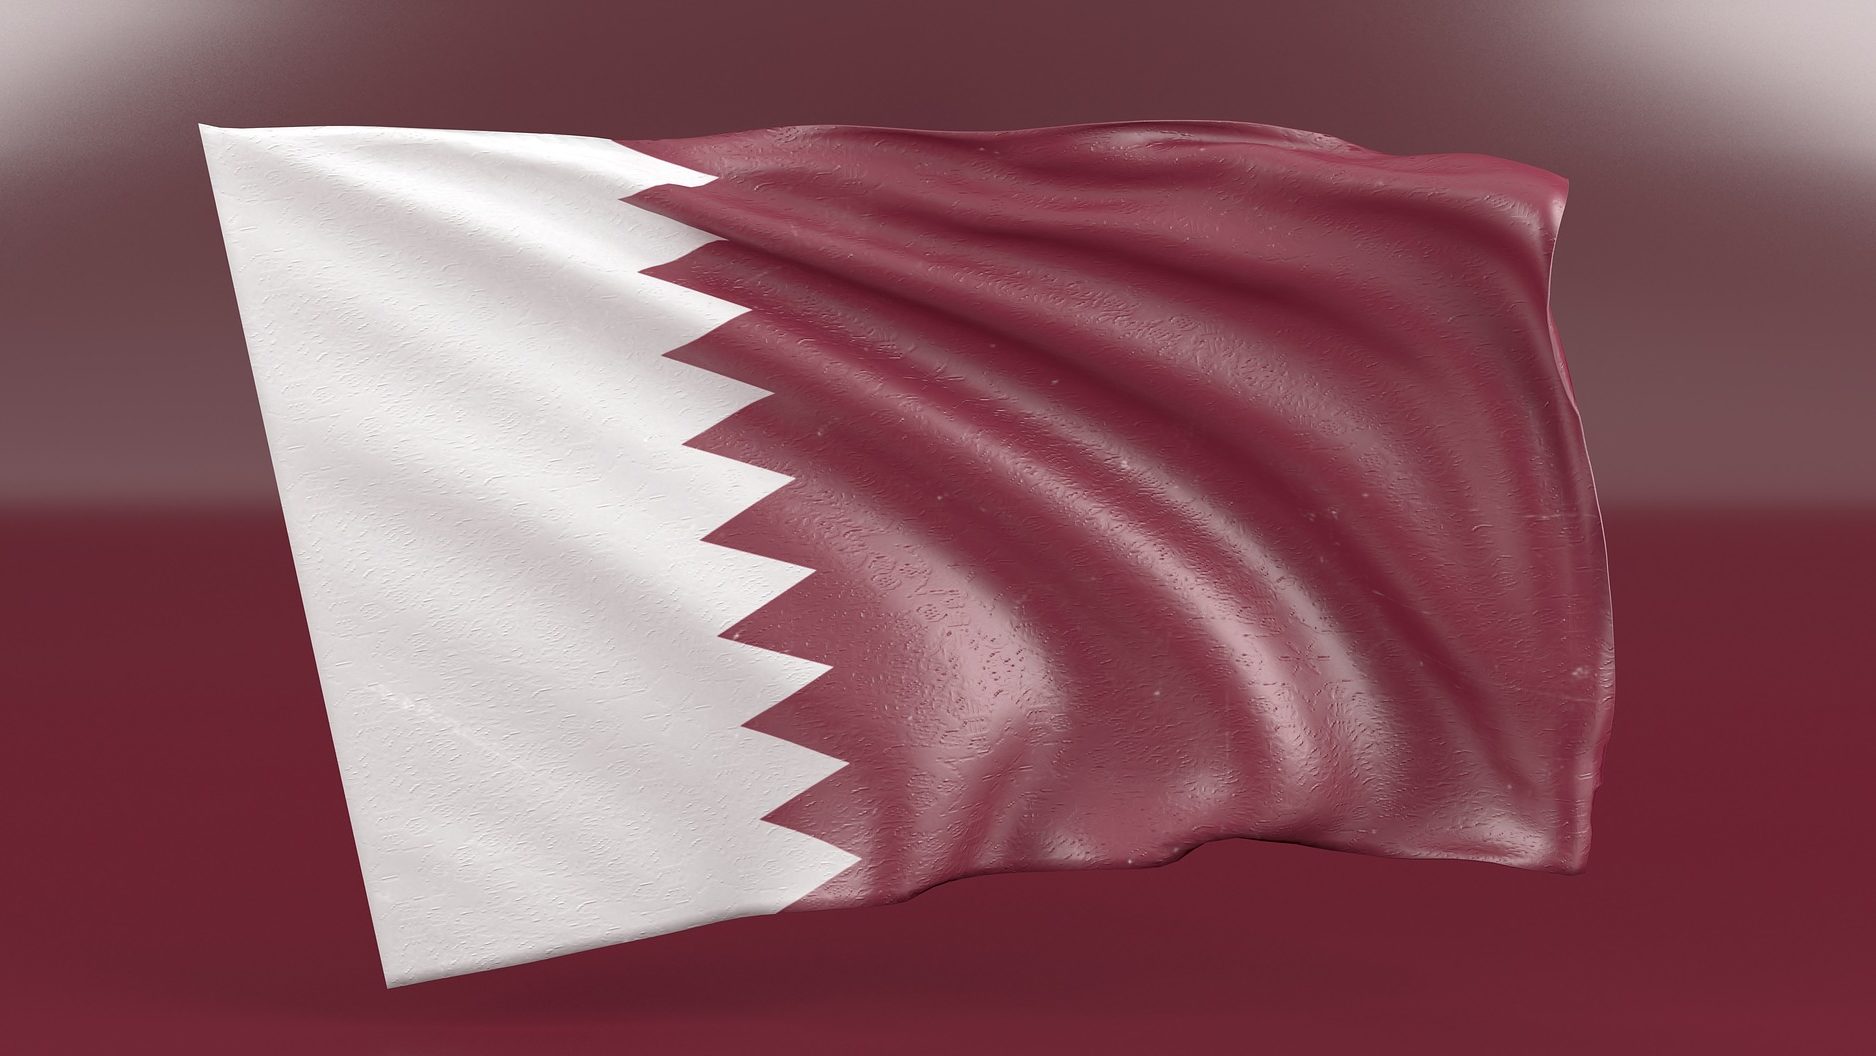 Committee Appointed to Oversee Qatar’s First Legislative Elections